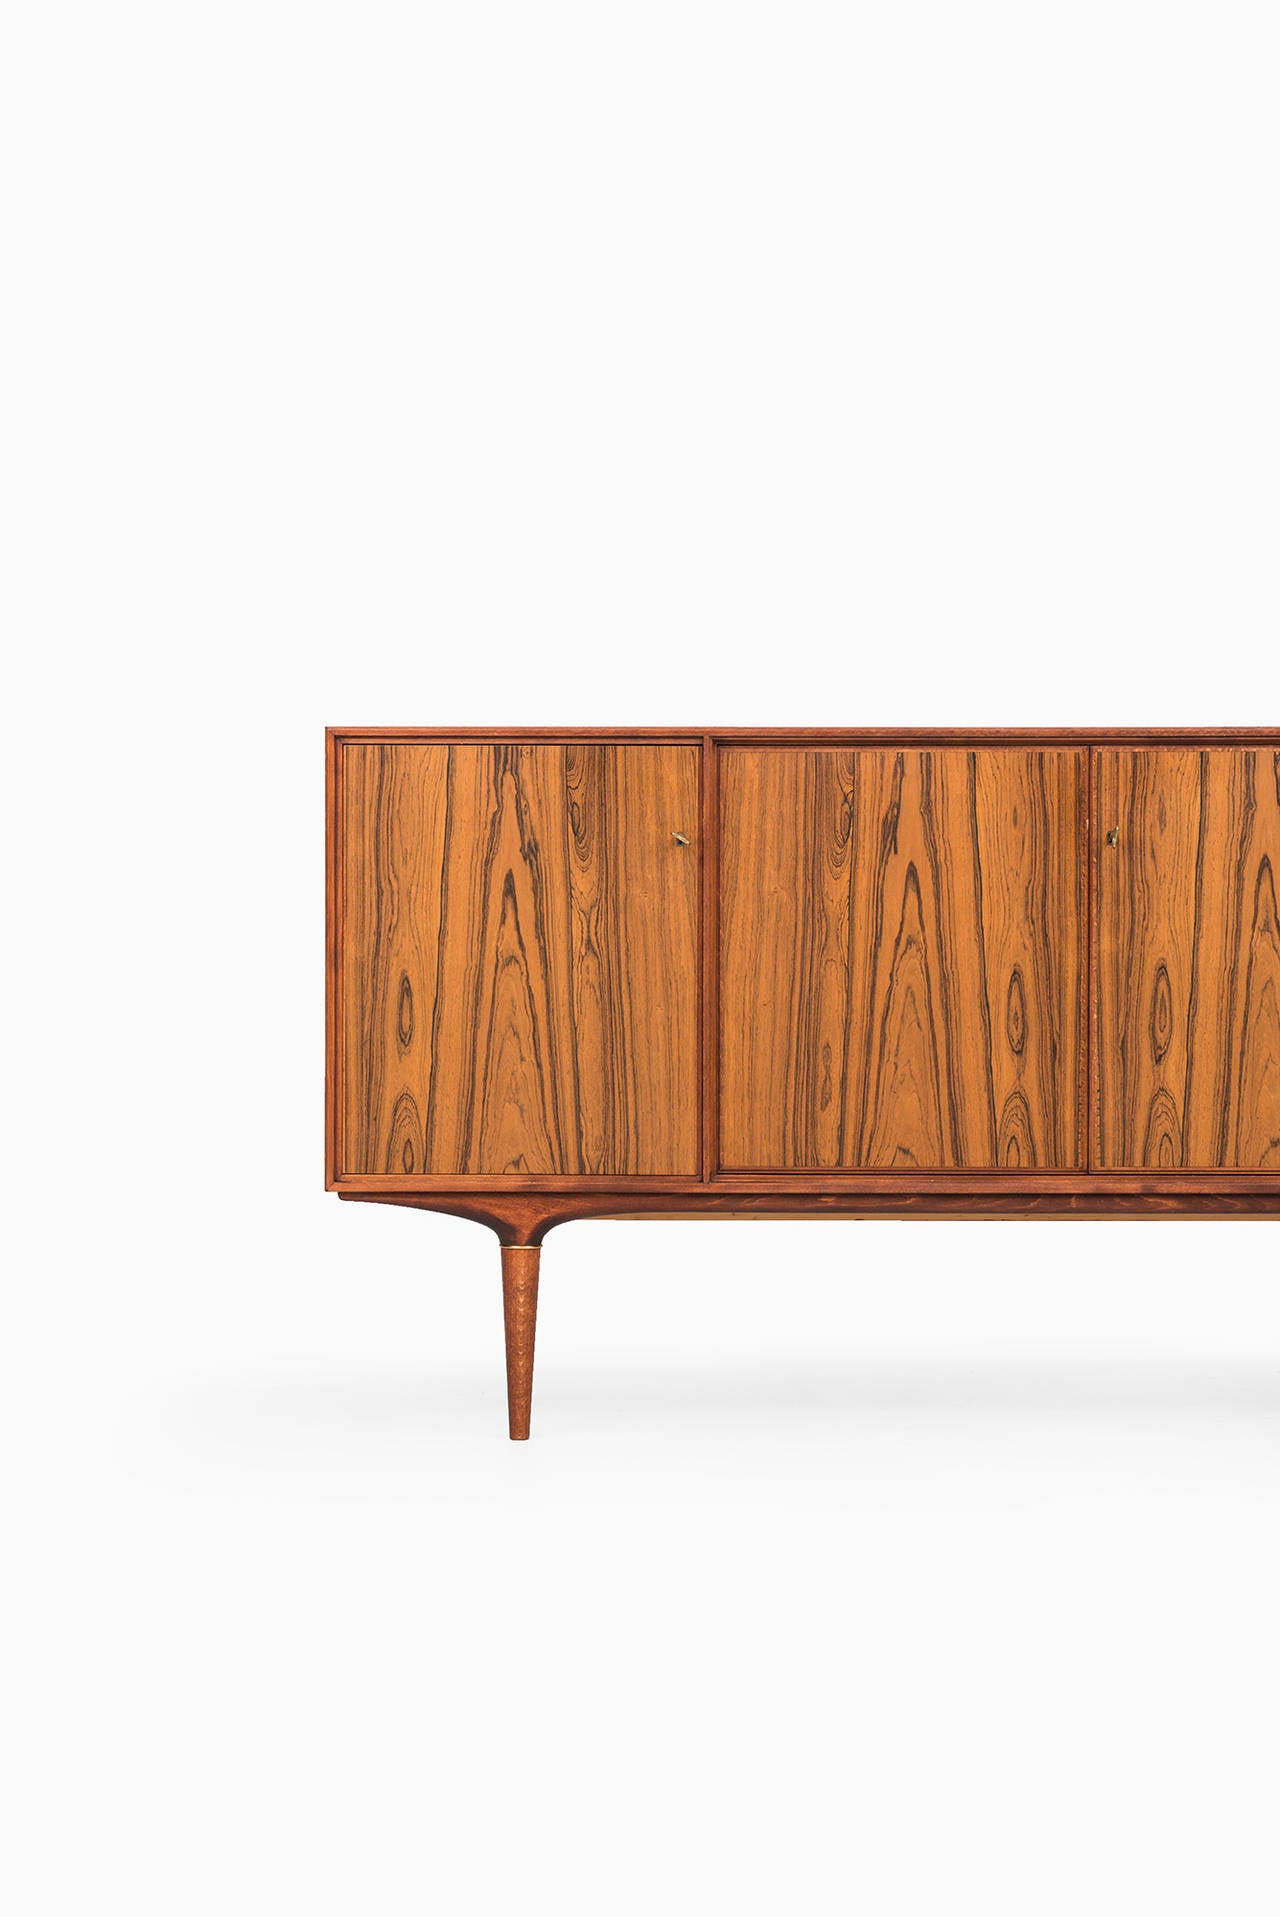 Rare sideboard model Cortina in rosewood and brass designed by Svante Skogh. Produced by Seffle möbelfabrik in Sweden.